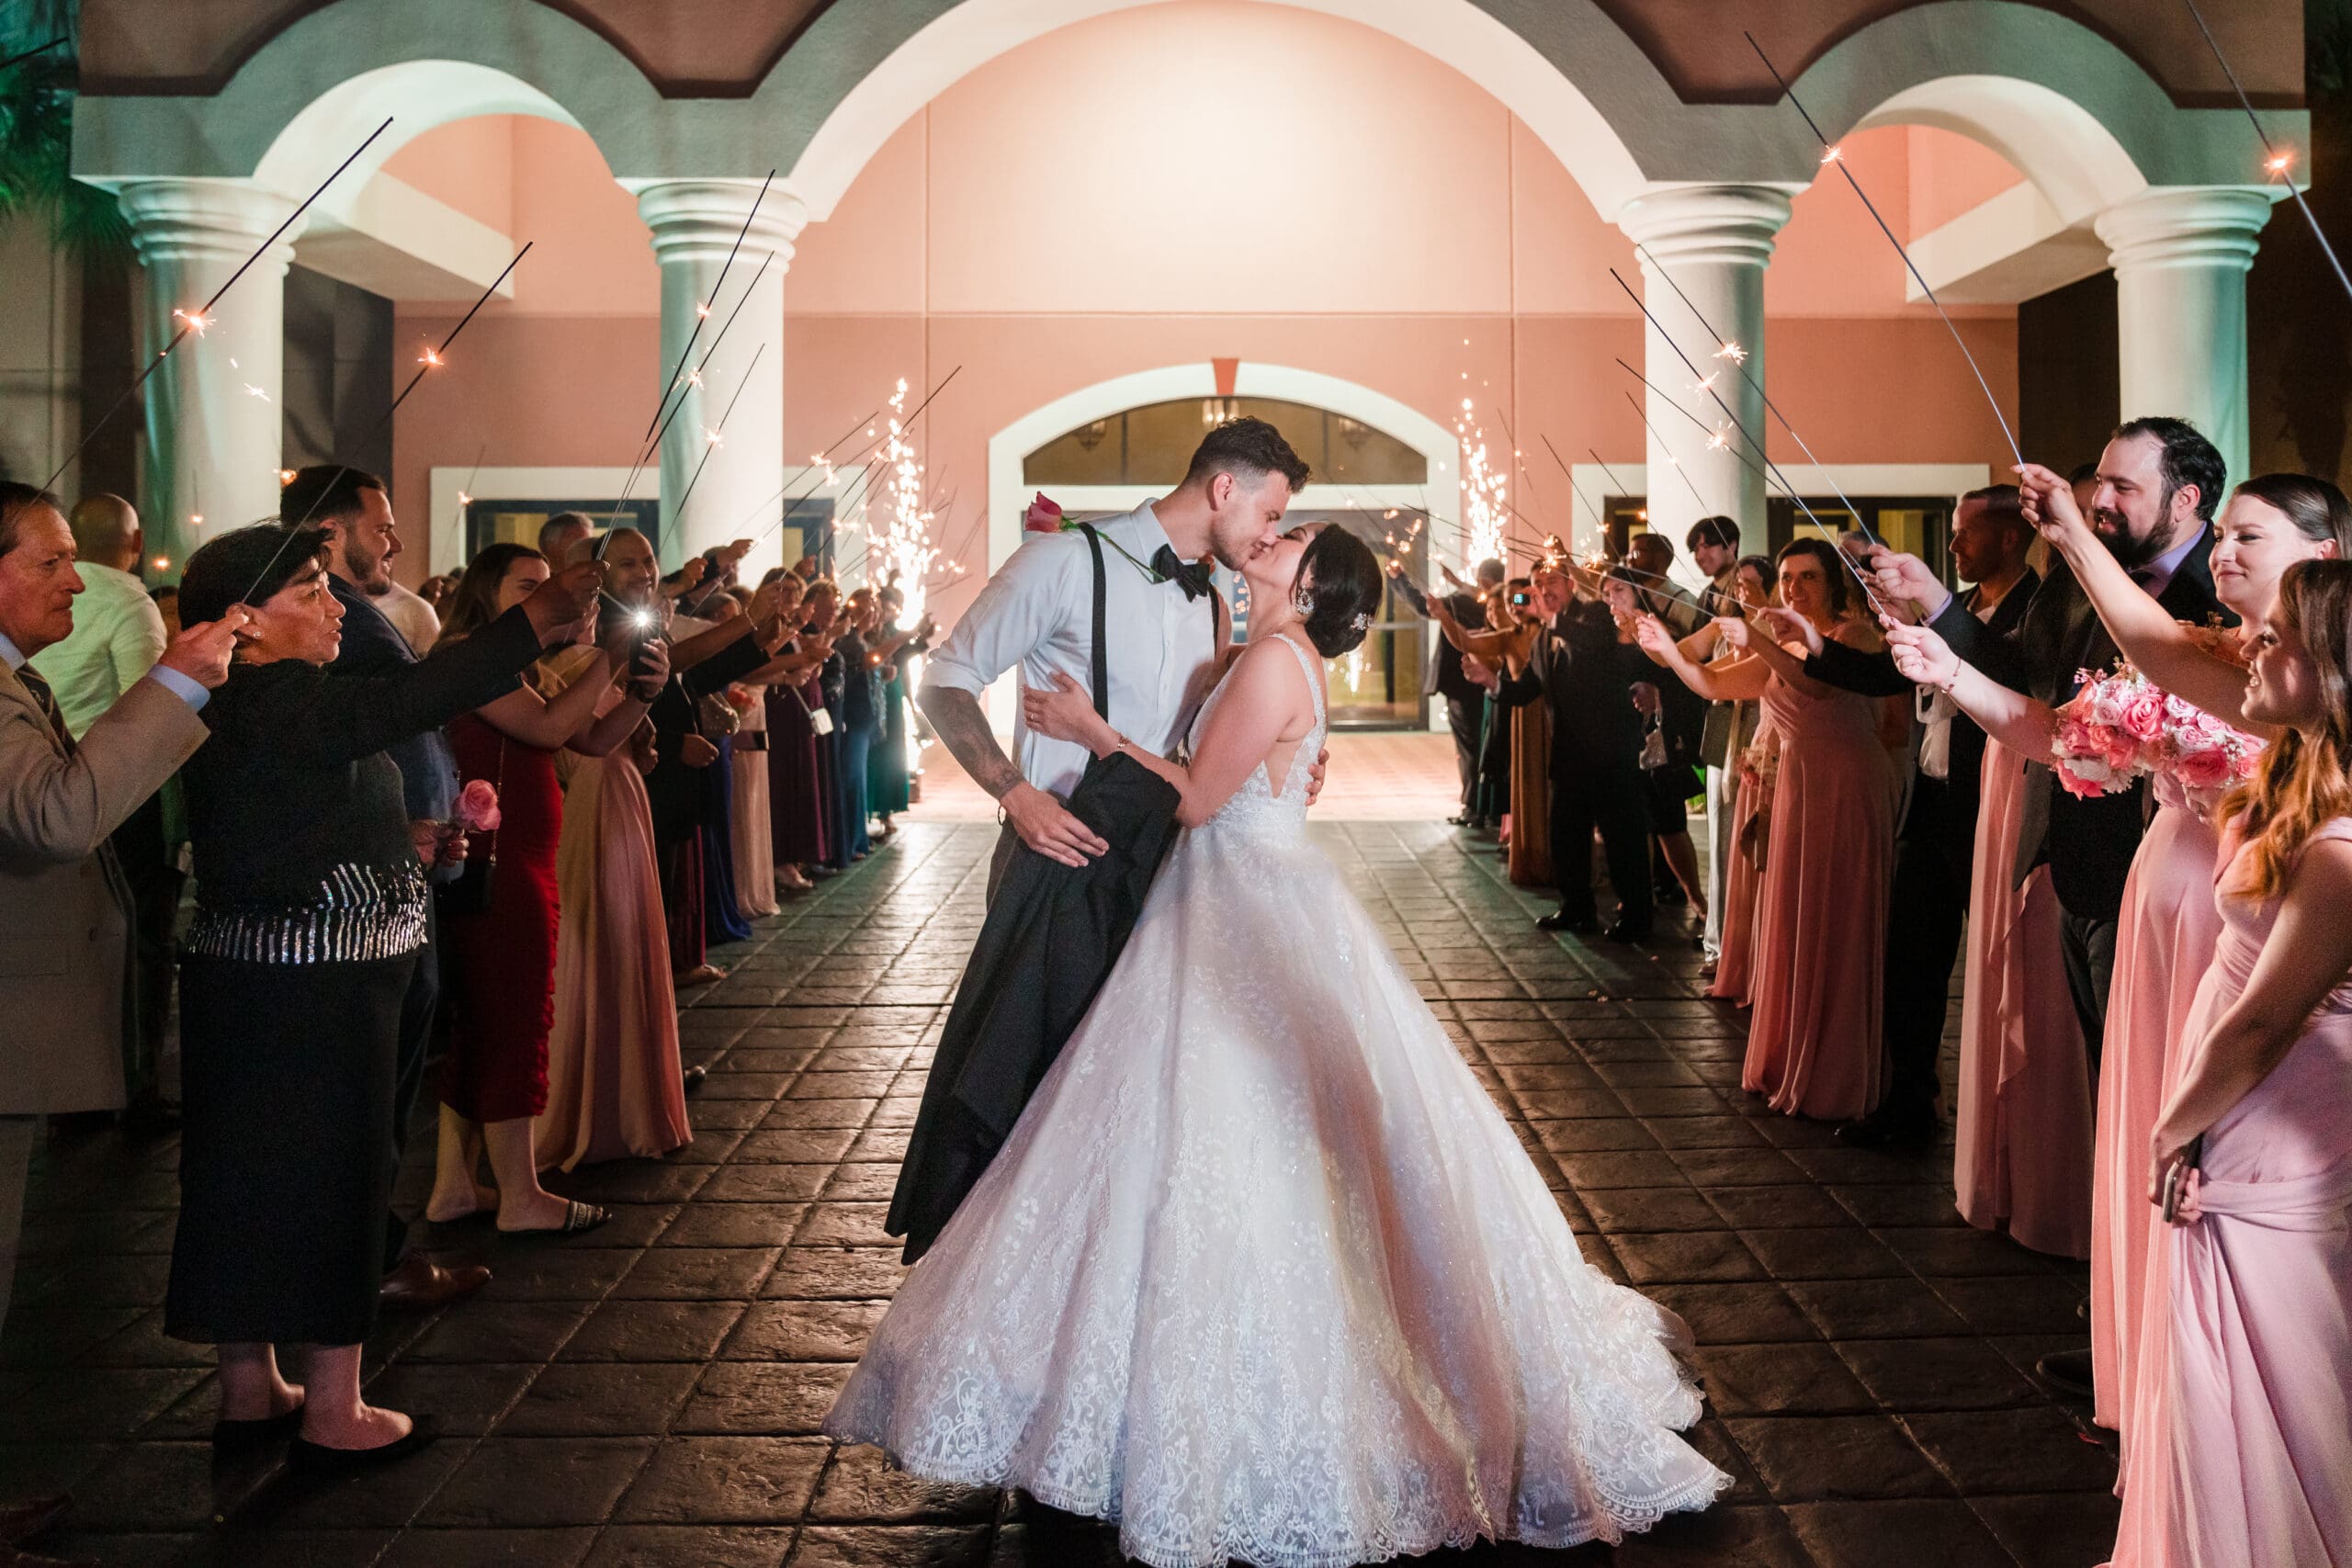 Jerzy Nieves Photography - Romantic moment captured as the bride and groom share a tender kiss, expressing their love and happiness at All Inclusive Weddings Orlando